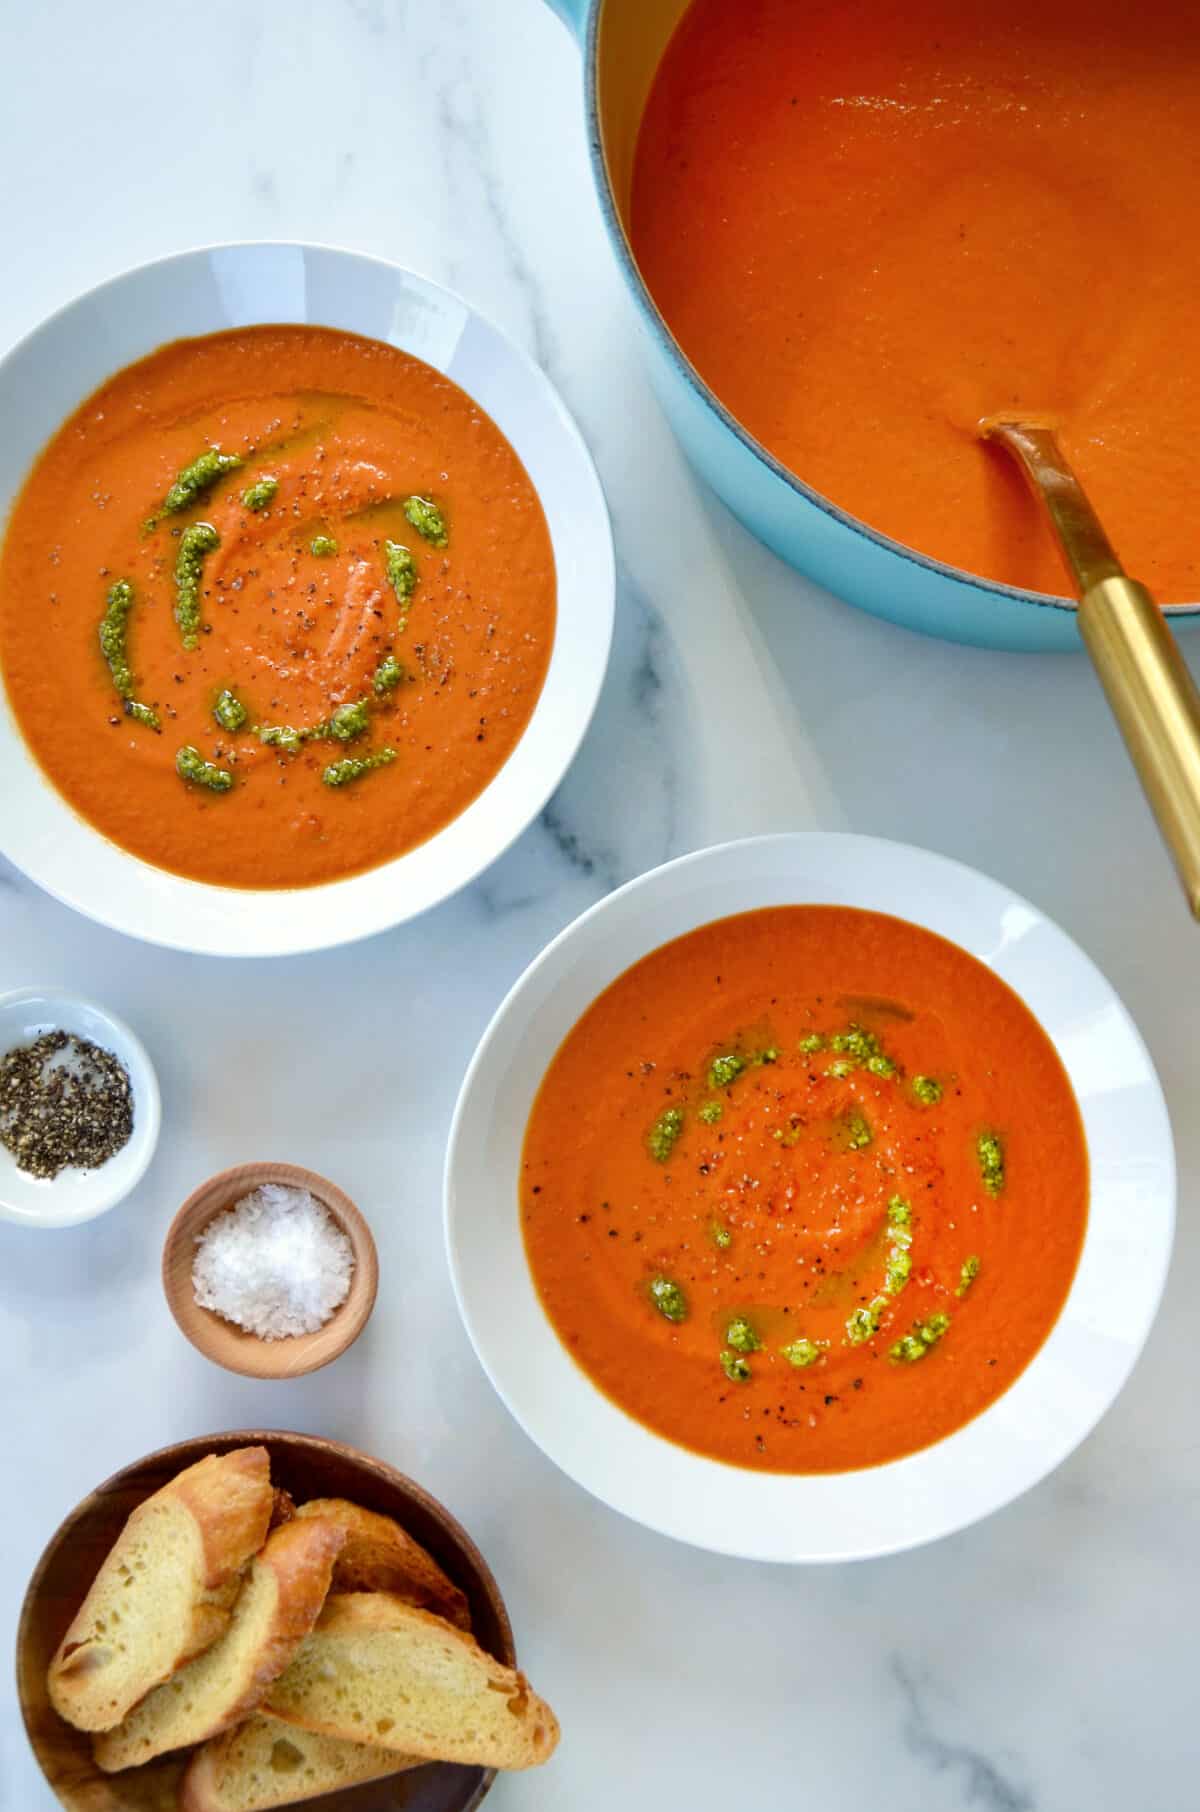 Two white bowls are filled with tomato soup and drizzled with basil pesto. Small bowls of salt, pepper and sliced baguette are nearby.